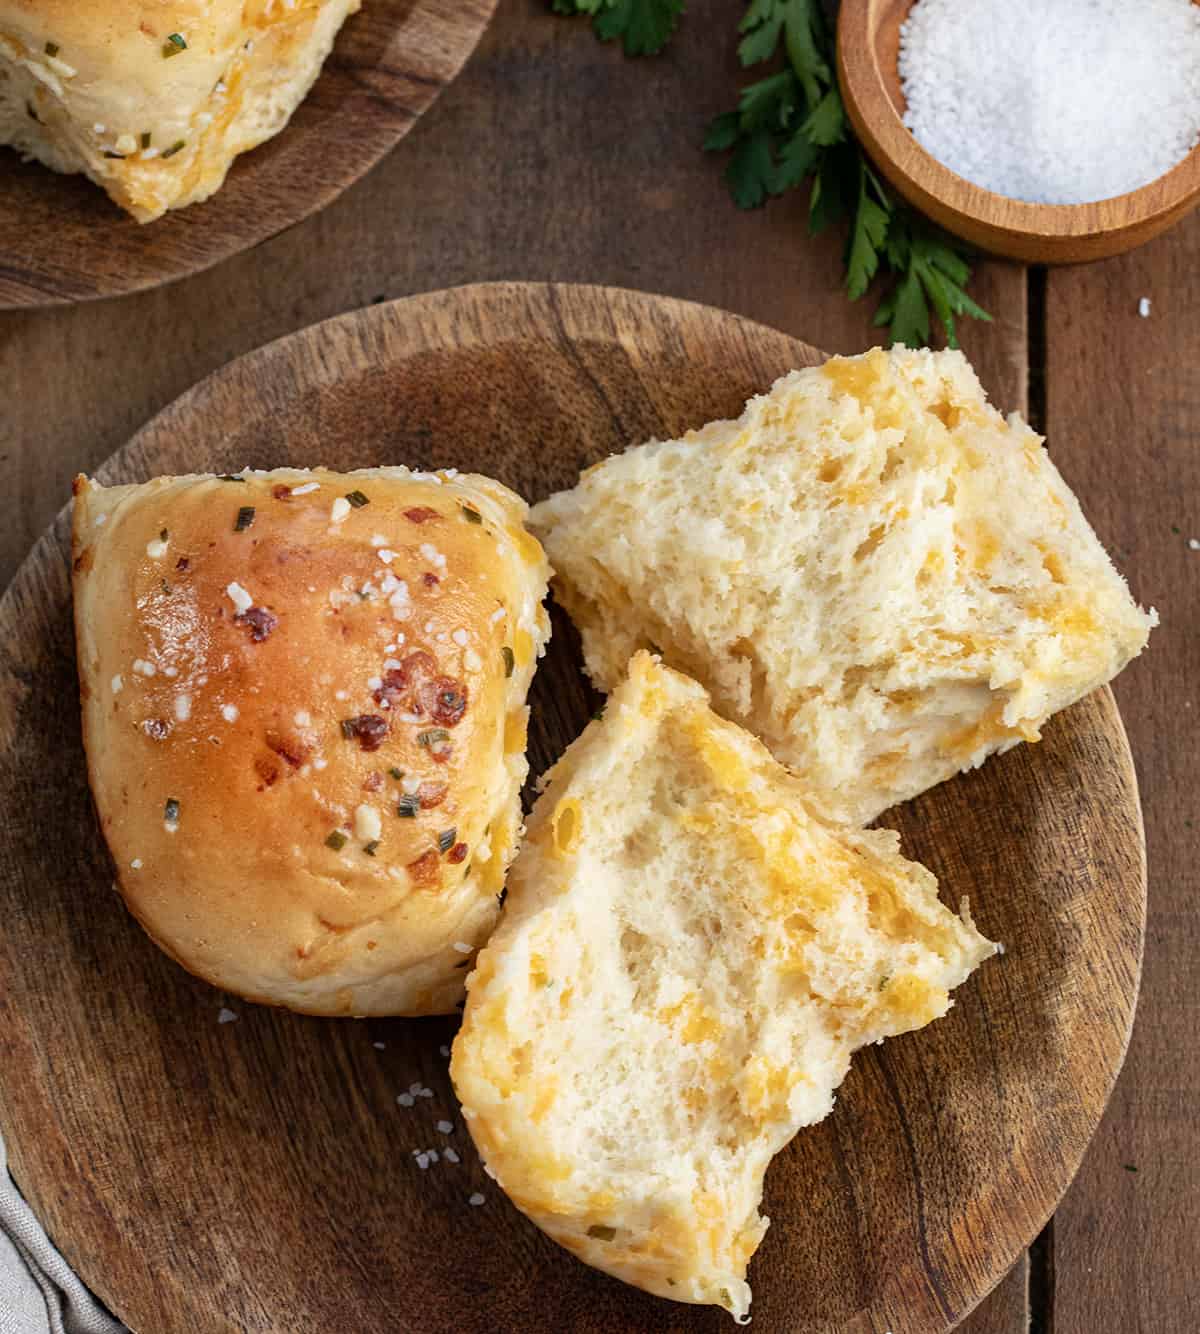 Cheesy Garlic Dinner Rolls on a plate with one roll halved showing the inside texture.